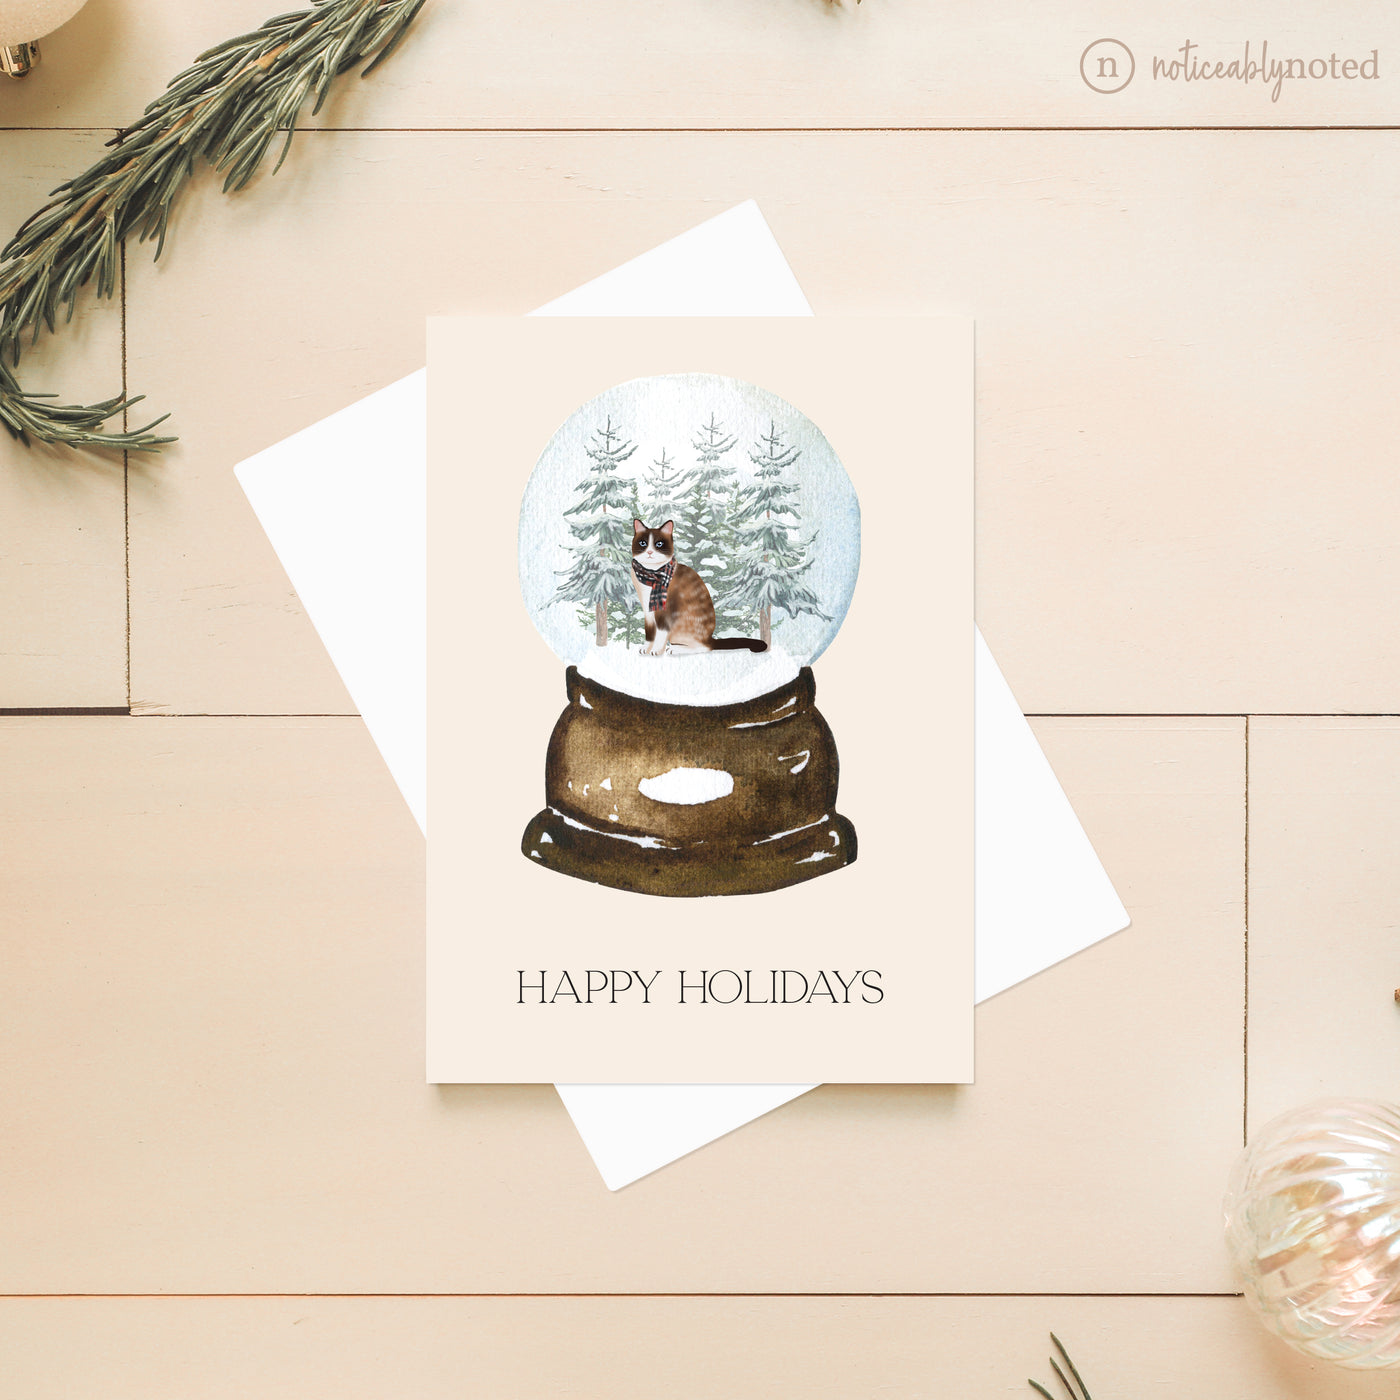 Snowshoe Holiday Card | Noticeably Noted